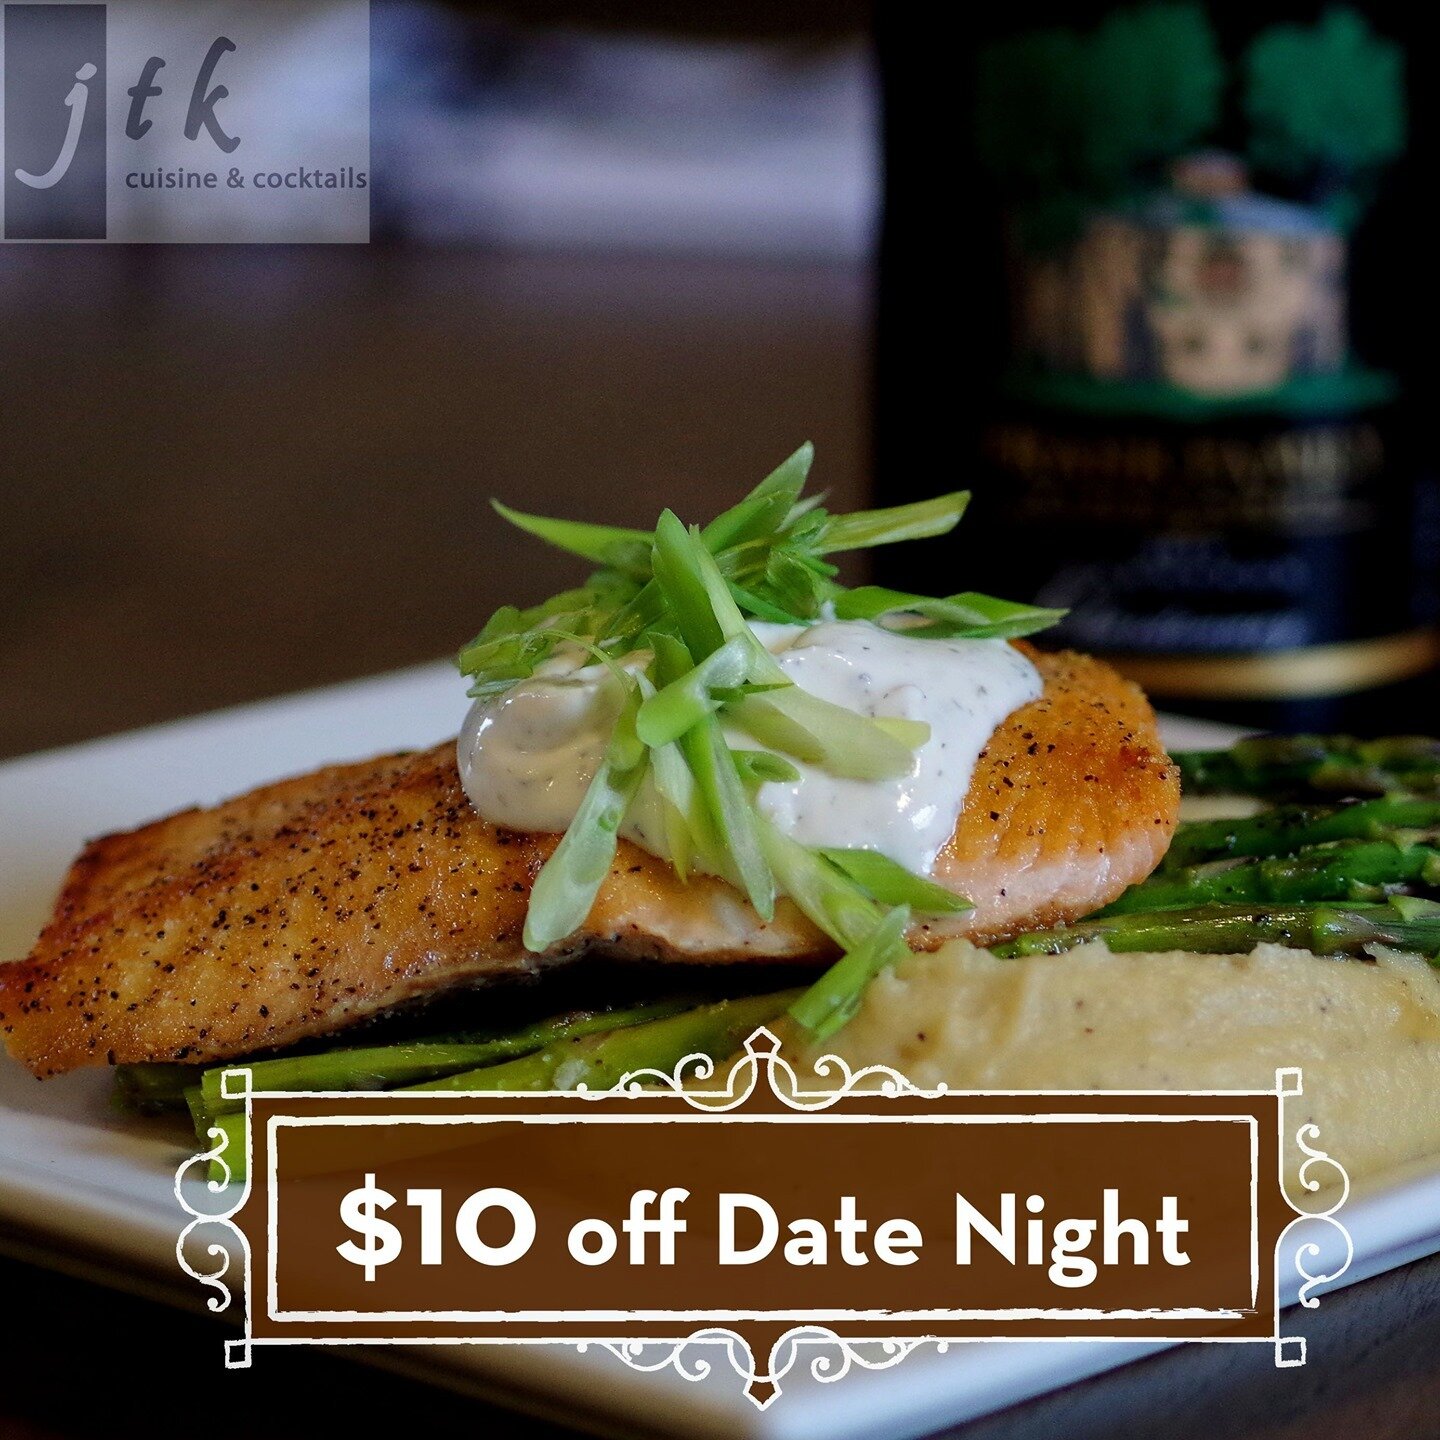 Our Date Night menu is $10 off tonight! Head on down to enjoy a 3 course meal for only $39! (originally $49)⠀⠀⠀⠀⠀⠀⠀
⠀⠀⠀⠀⠀⠀⠀
#jtklnk #downtownlincoln #mylnk #lincolnhaymarket #restaurant #dessert #cremebrulee #datenight